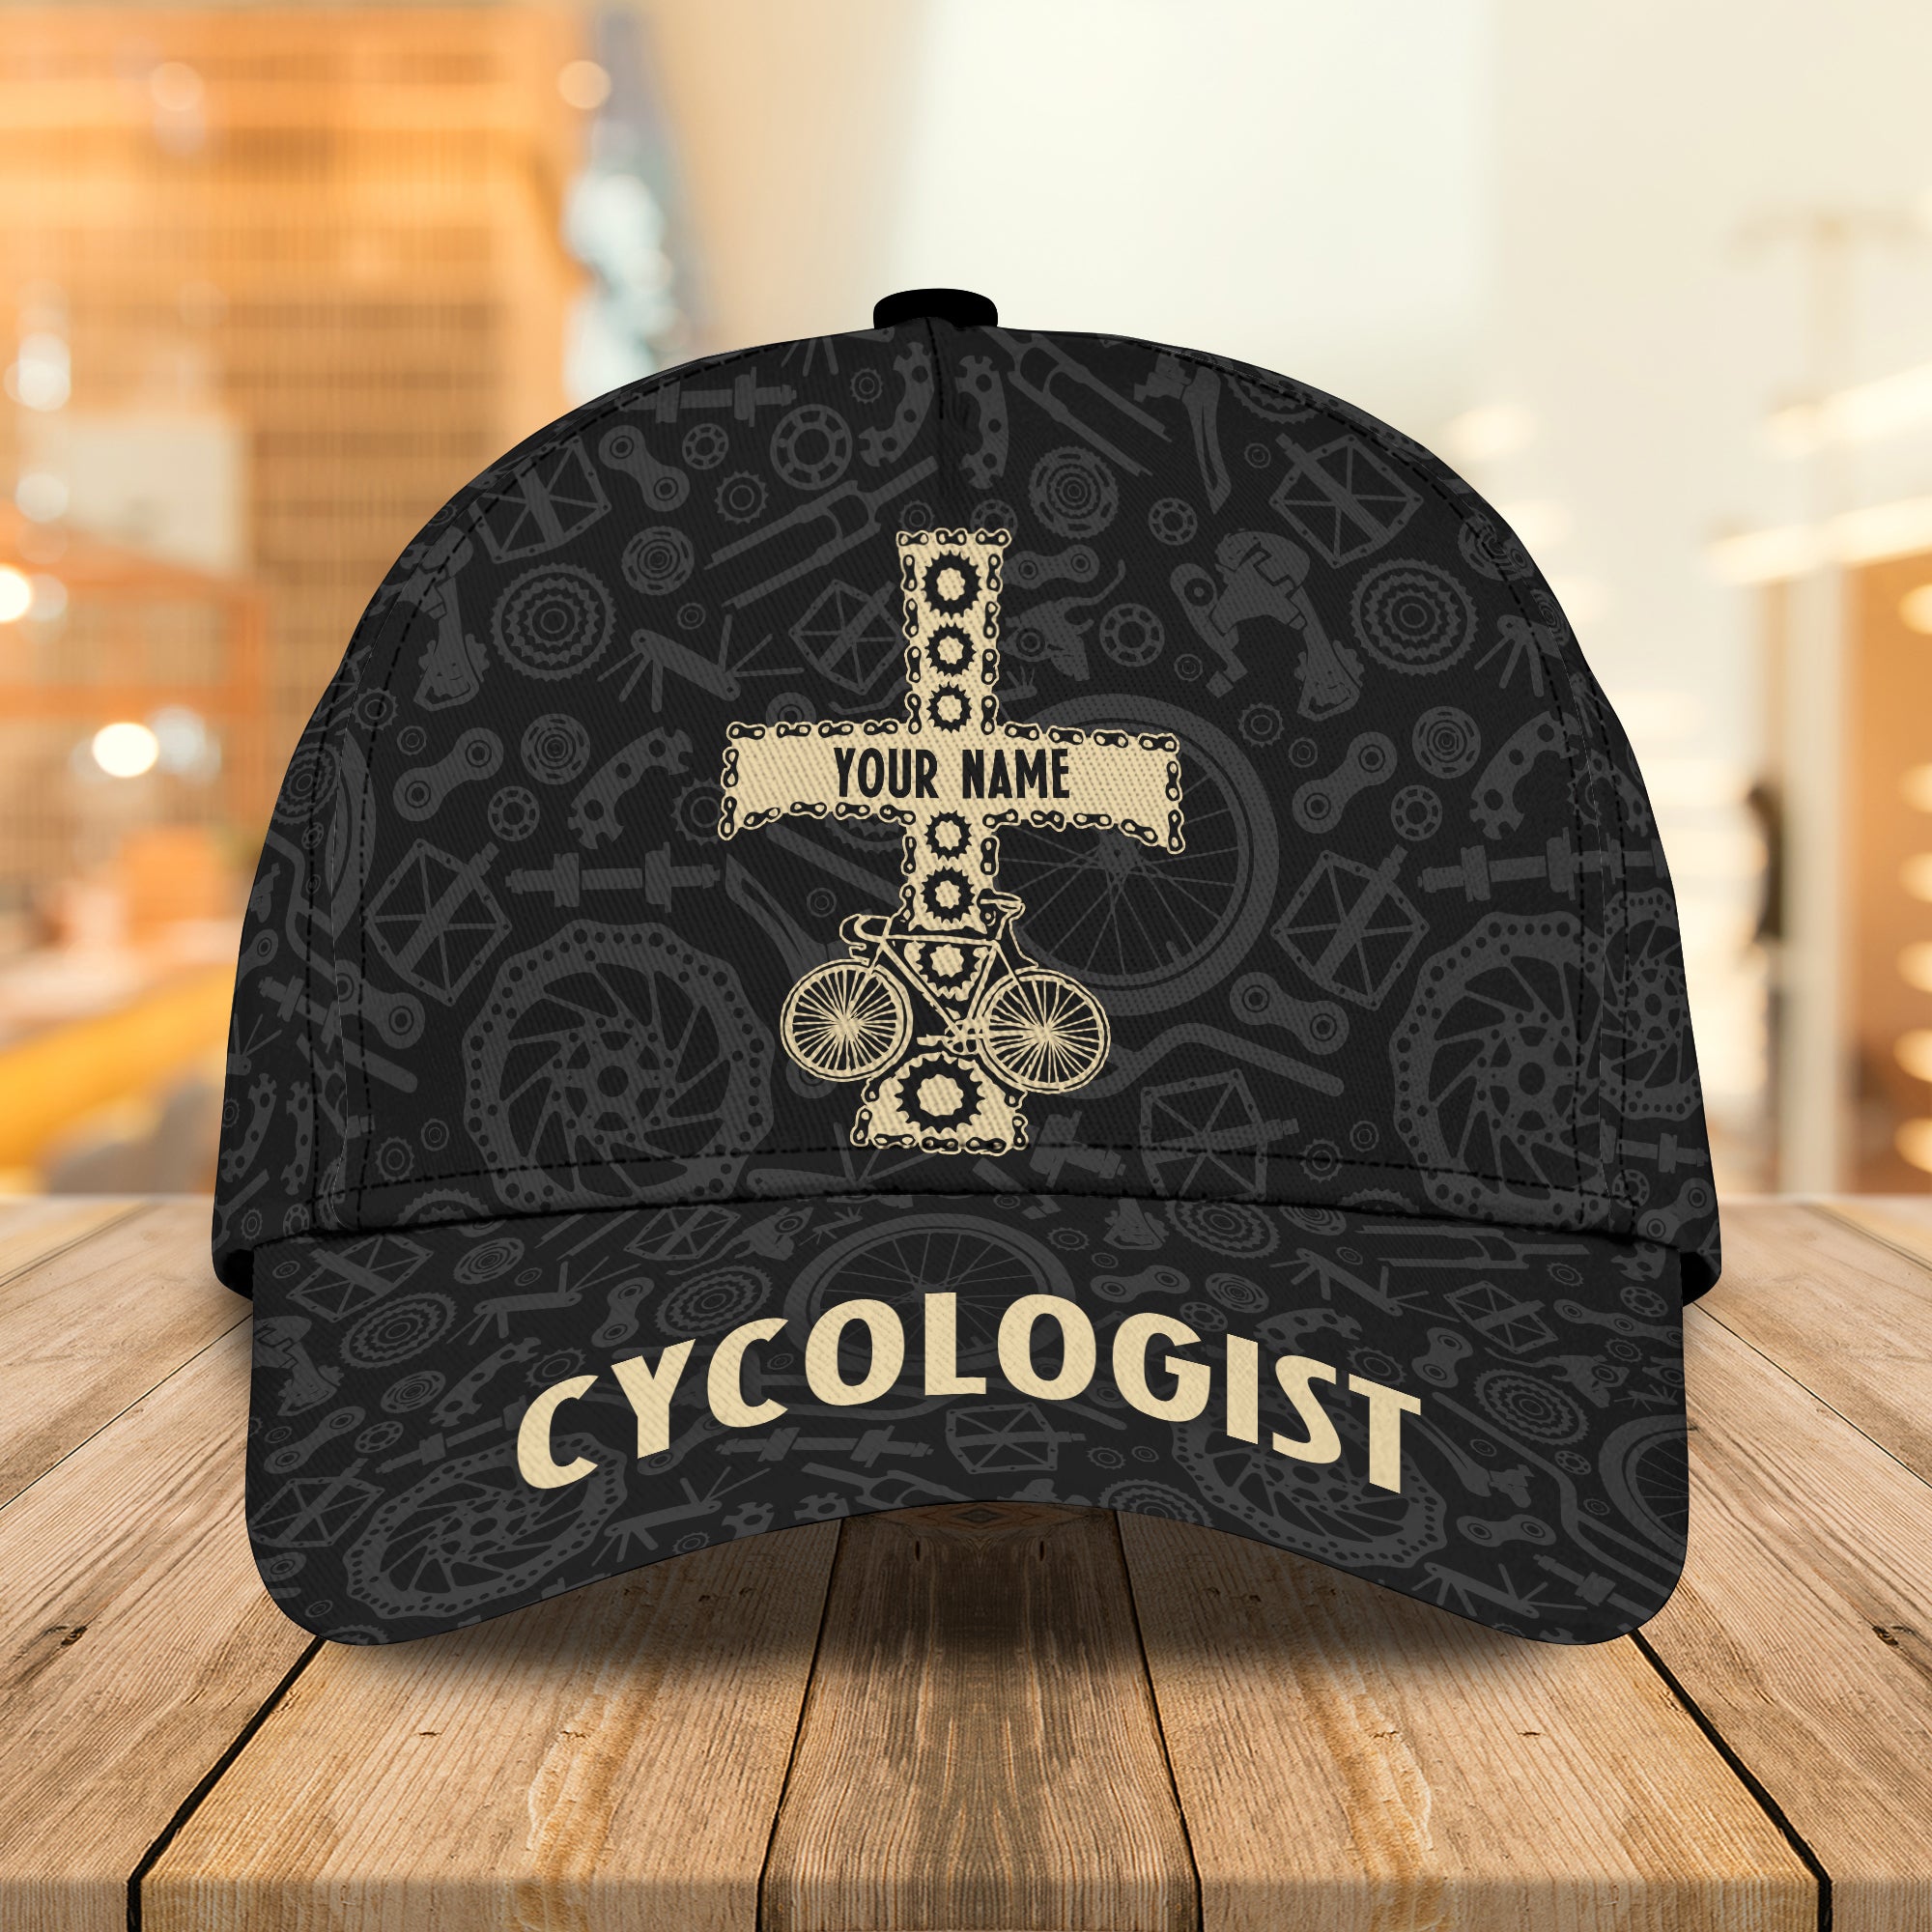 Cycologist - Personalized Name Cap - Vhv-cap-012